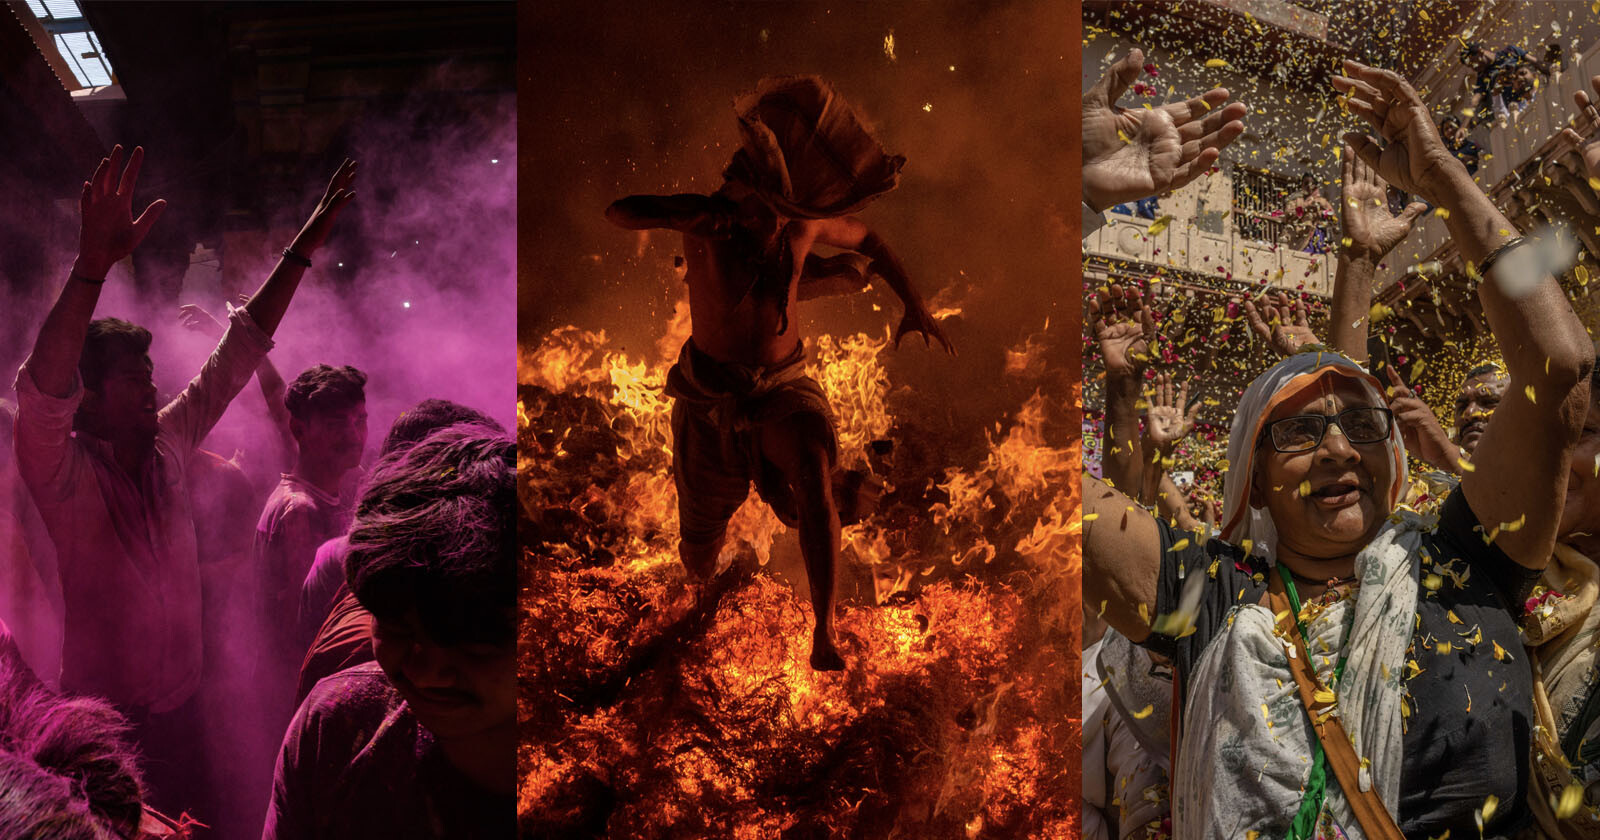 Fire, Color, and Love: Photographer Captures Worlds Most Photogenic Event